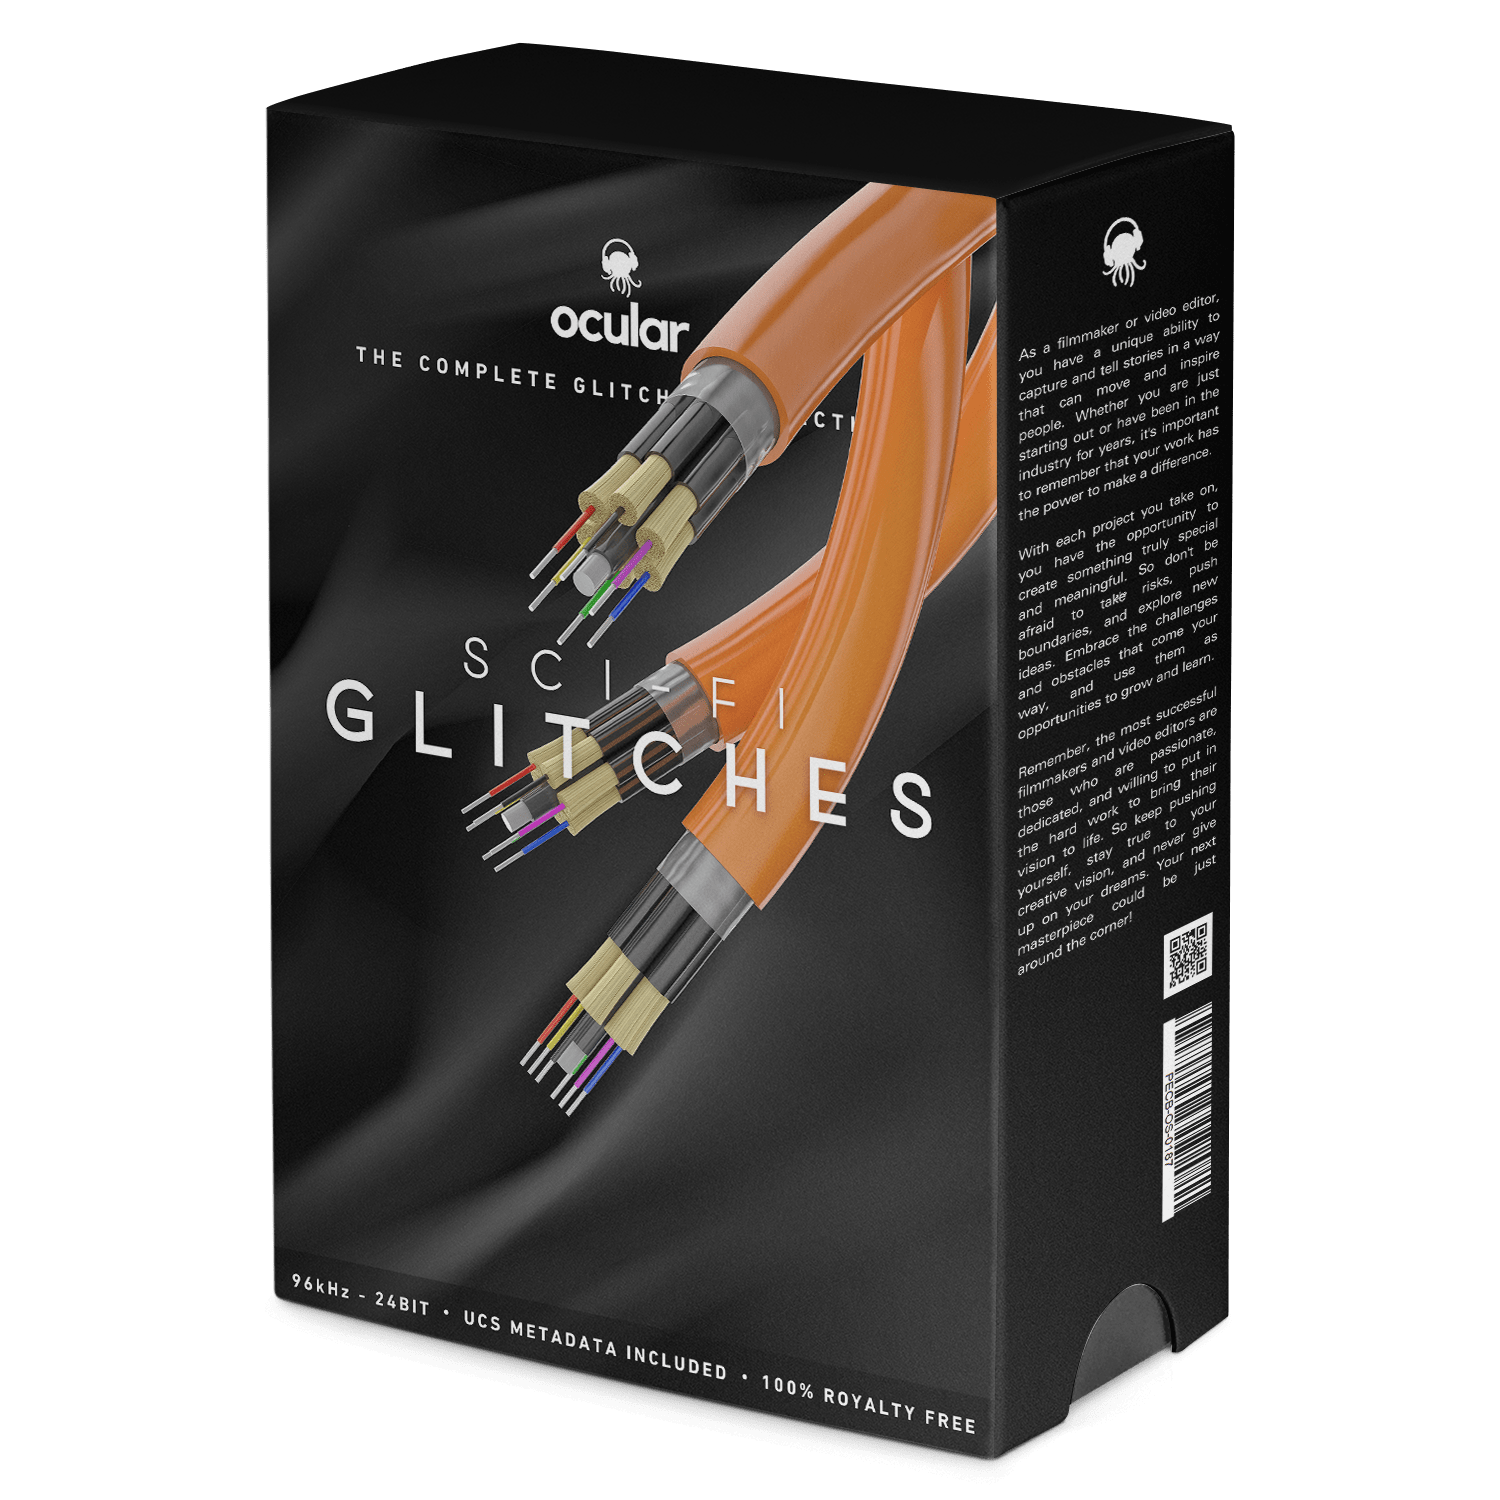 Glitch Sound Effects Pack in Sound Effects - UE Marketplace